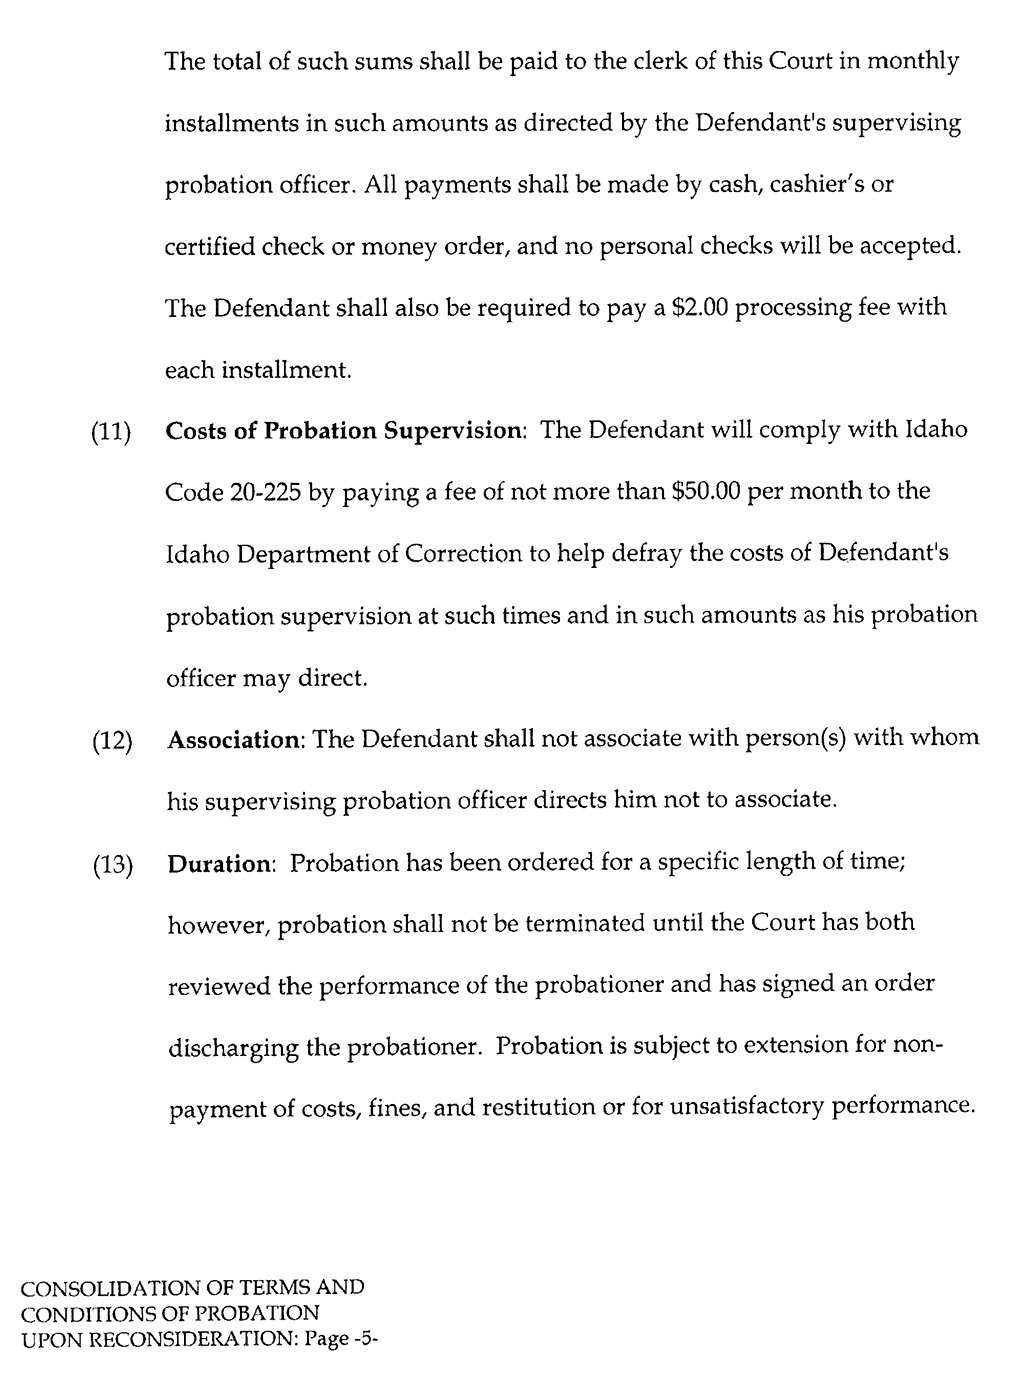 Consolidation of Terms & Conditions of Probation upon Reconsideration page 5